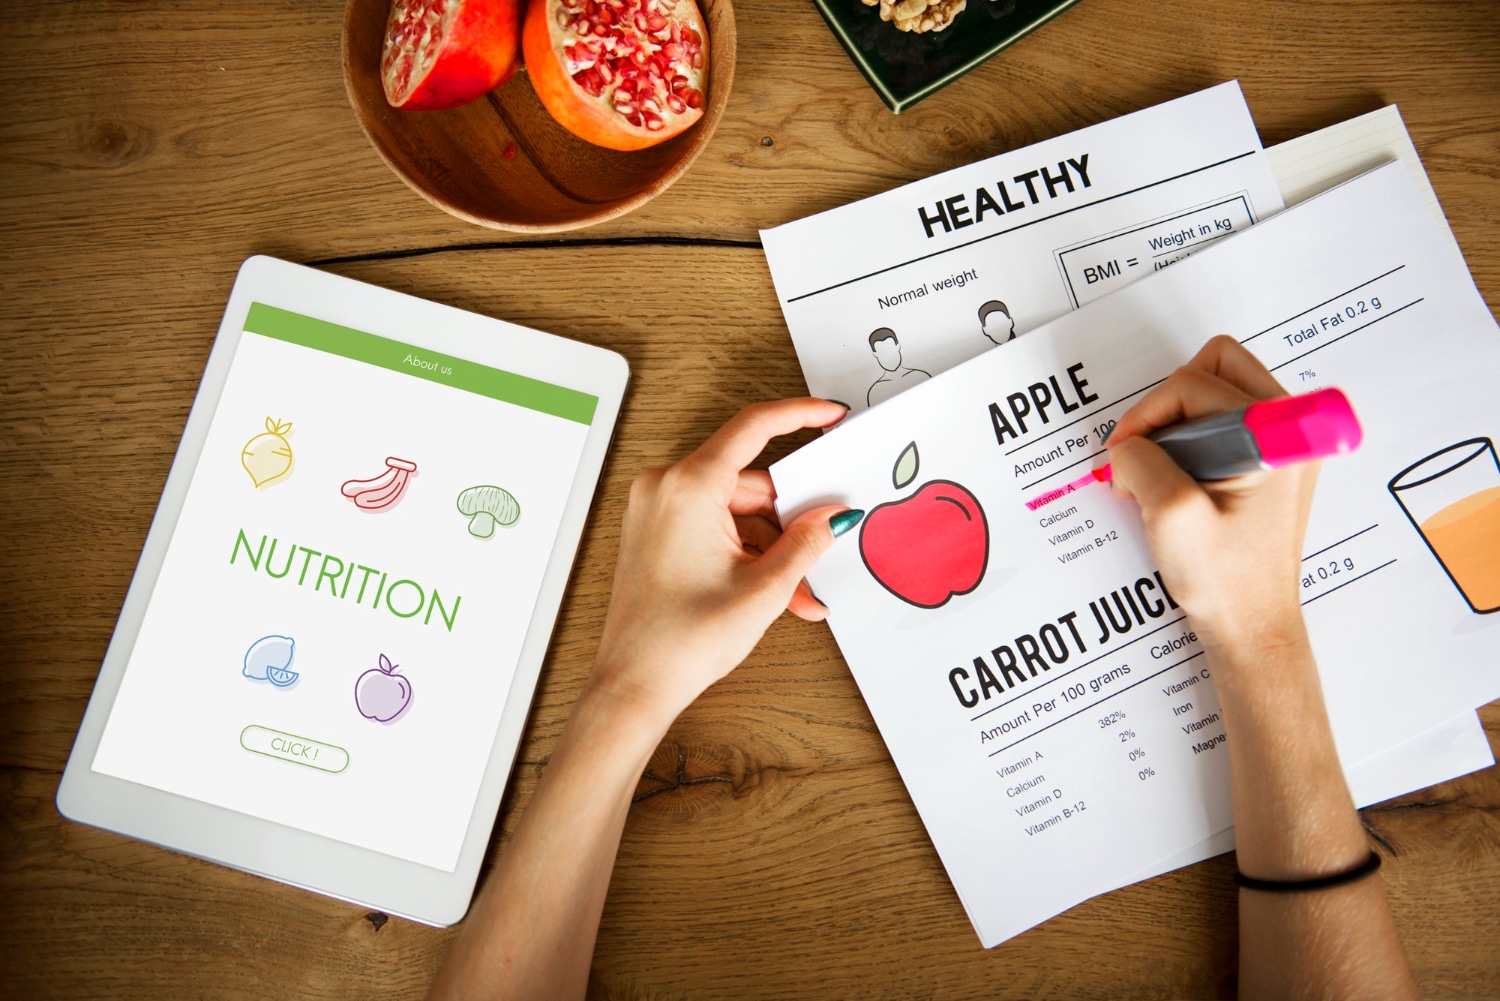 cronometer.com’s Nutritional Tracking: Optimizing Health in 2024